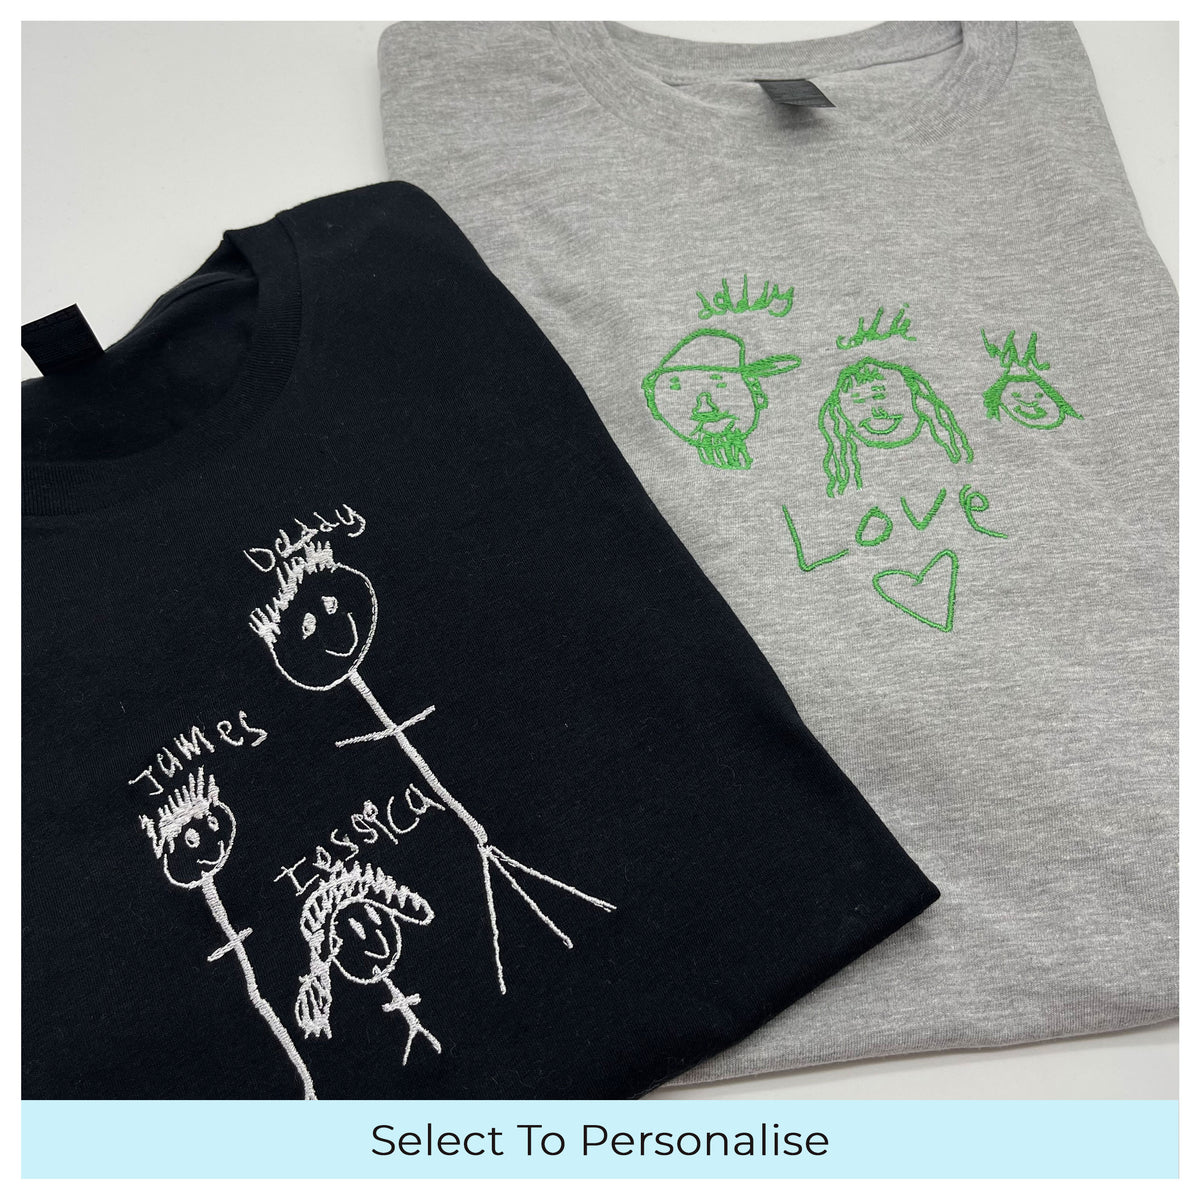 Father's Day mens t-shirt personalised kids drawing